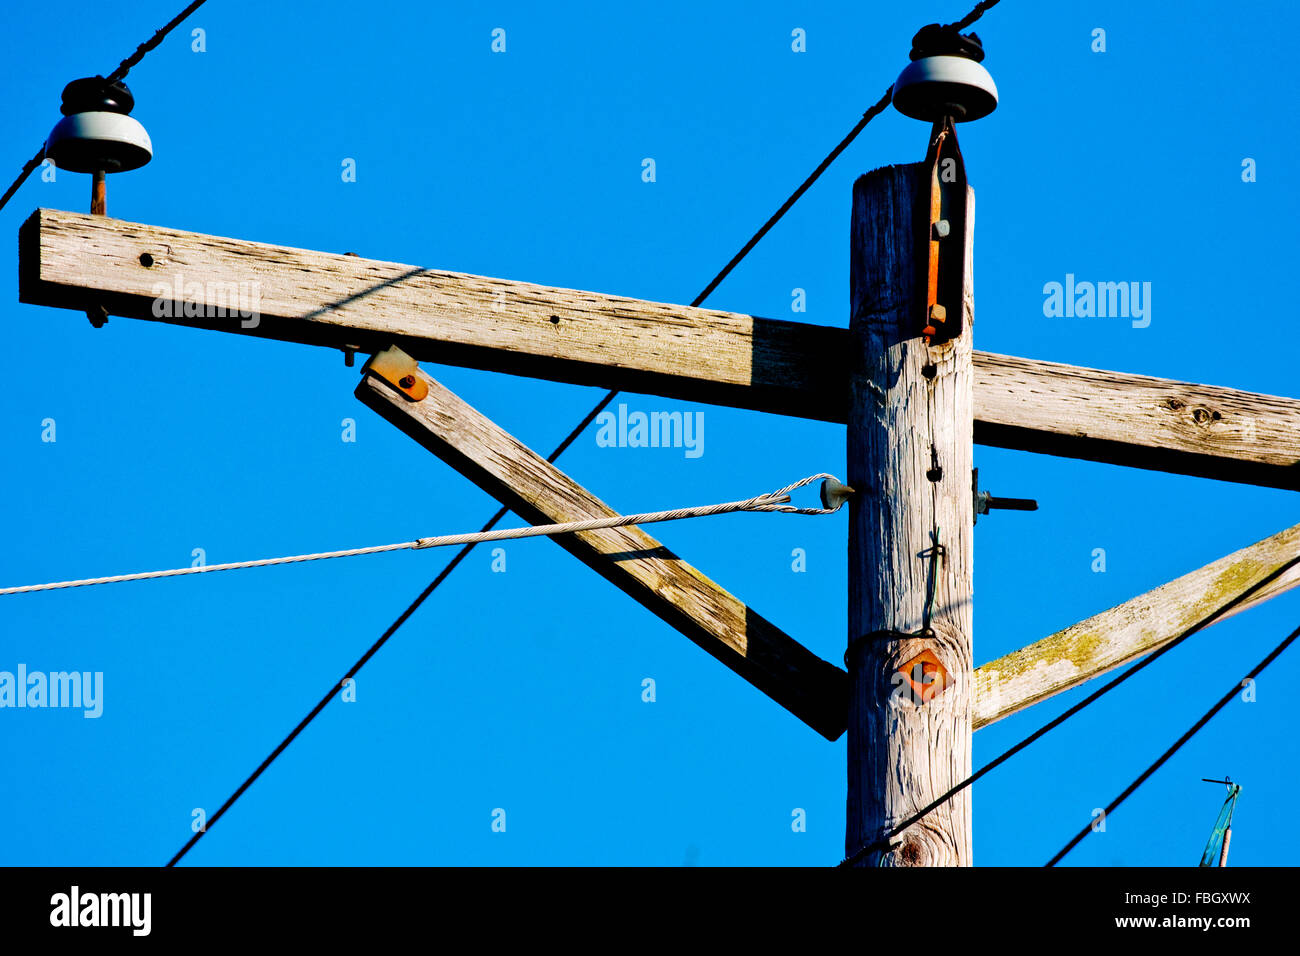 The top crossbar section of a telephone pole or power line post. Stock Photo